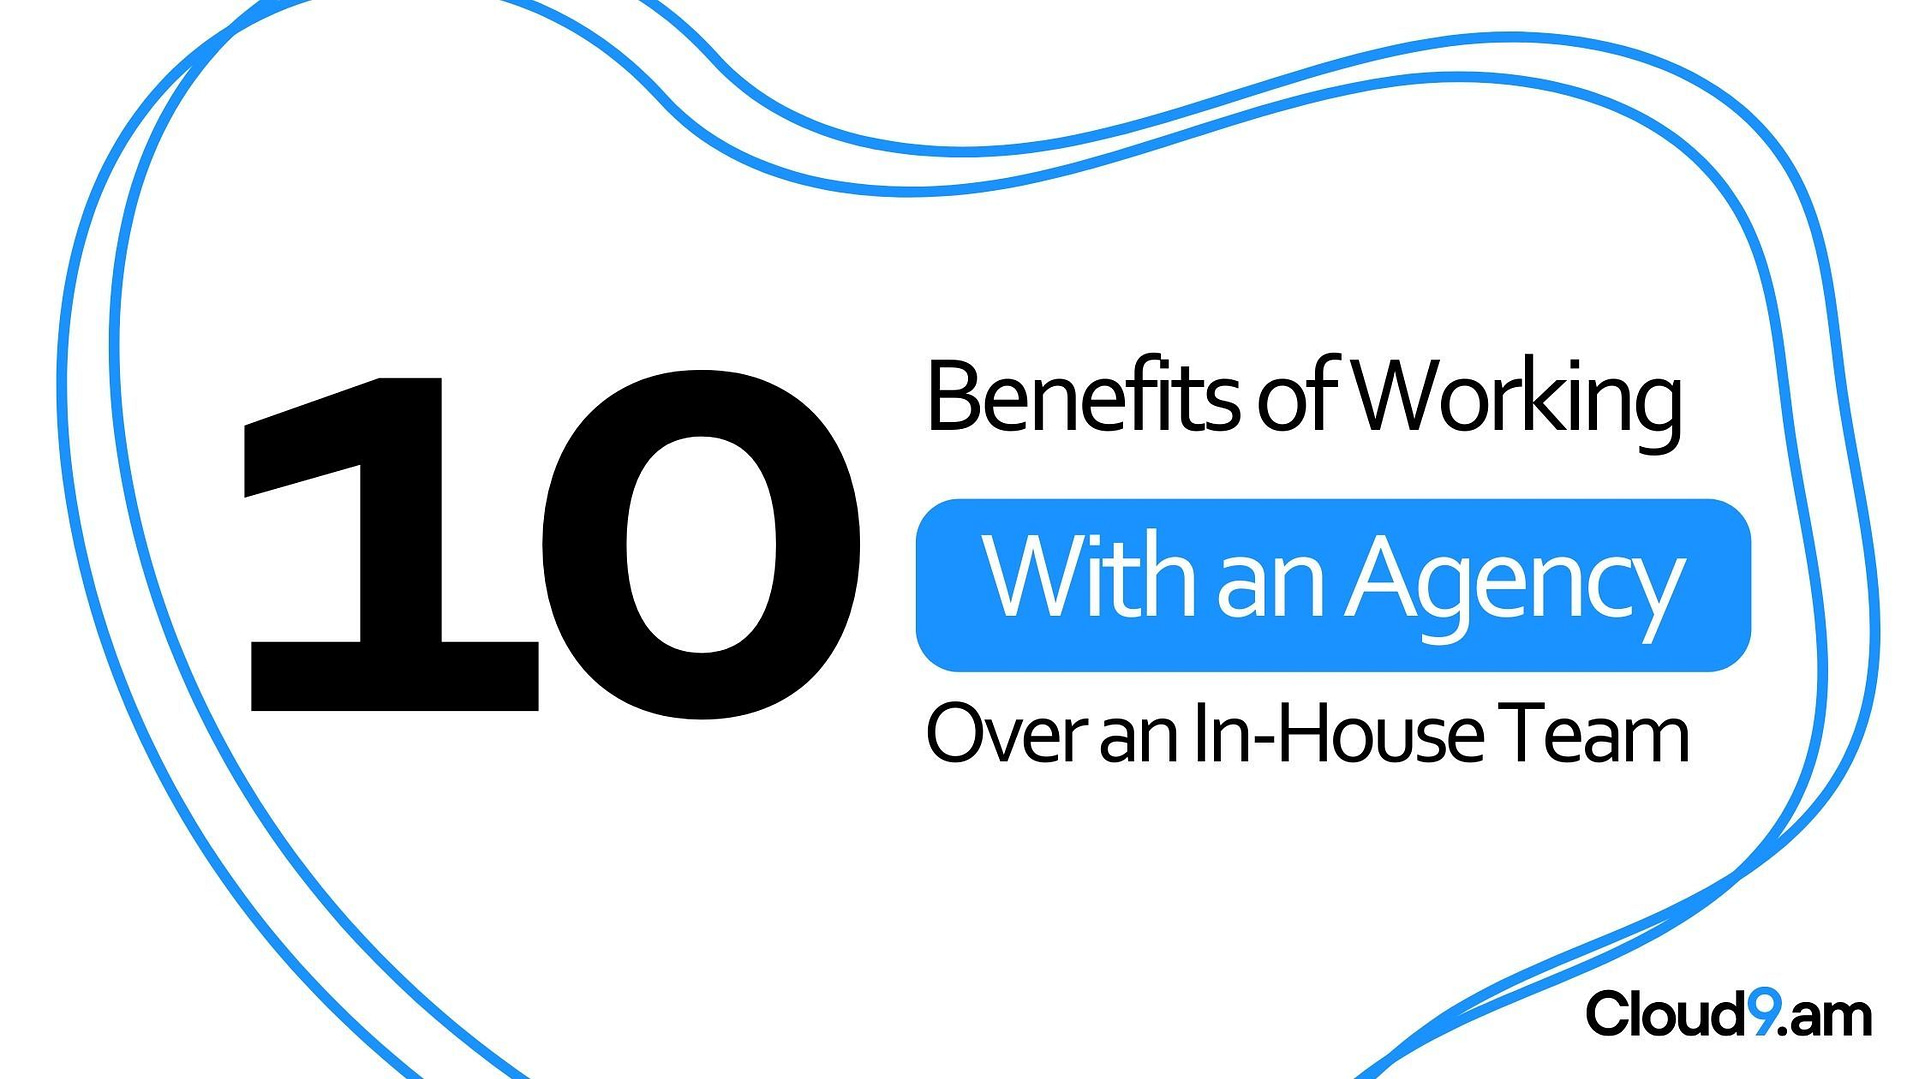 10 Benefits of Working With an Agency Over an In-House Team